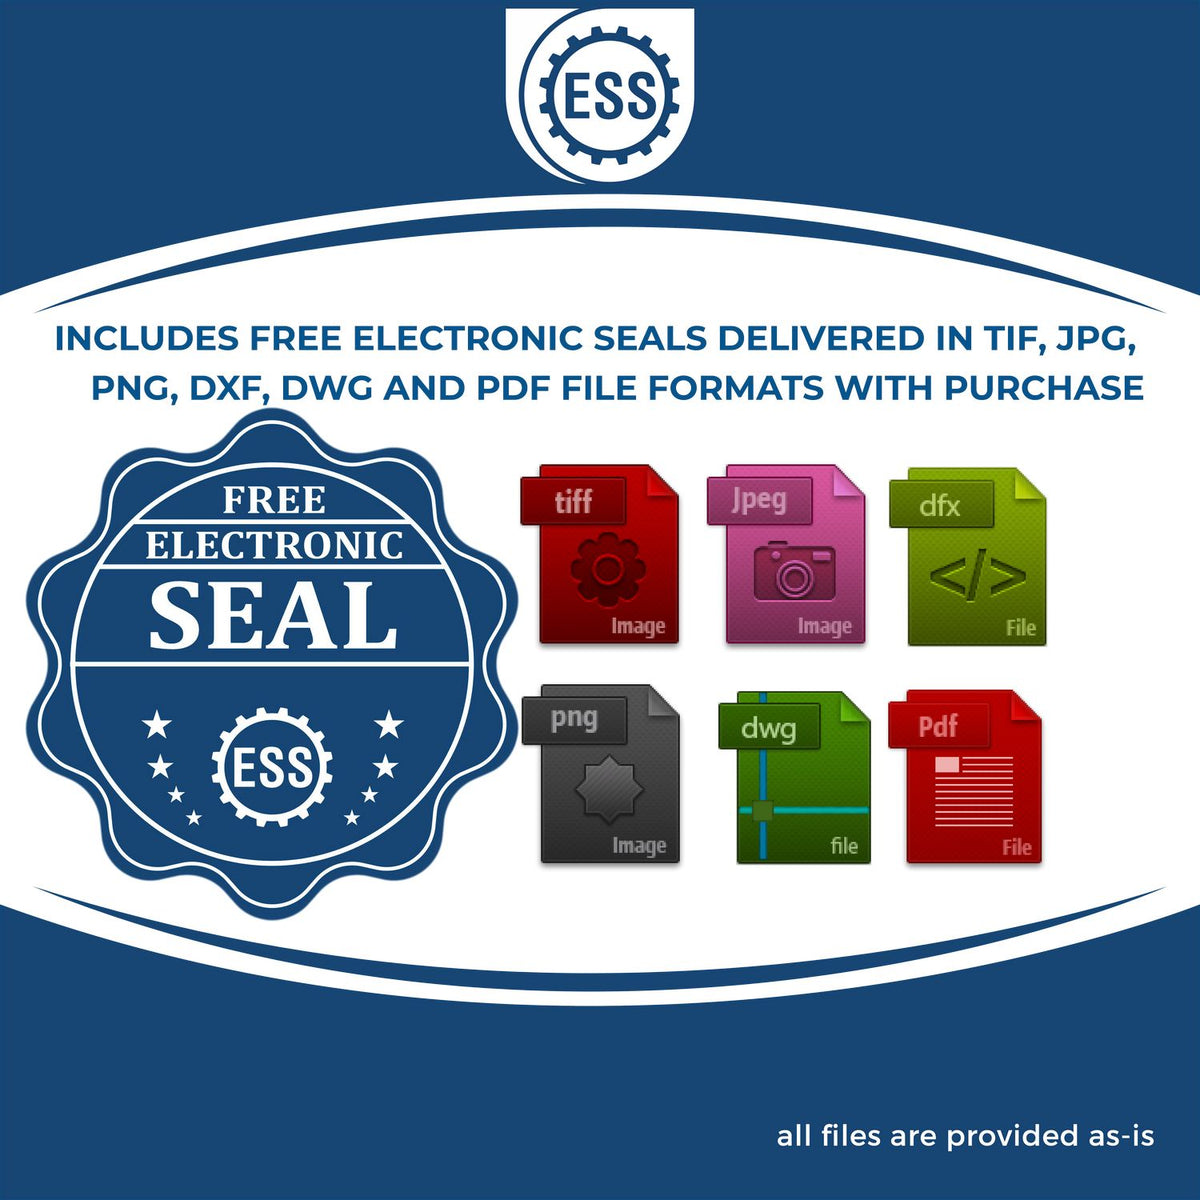 An infographic for the free electronic seal for the State of North Dakota Extended Long Reach Geologist Seal illustrating the different file type icons such as DXF, DWG, TIF, JPG and PNG.